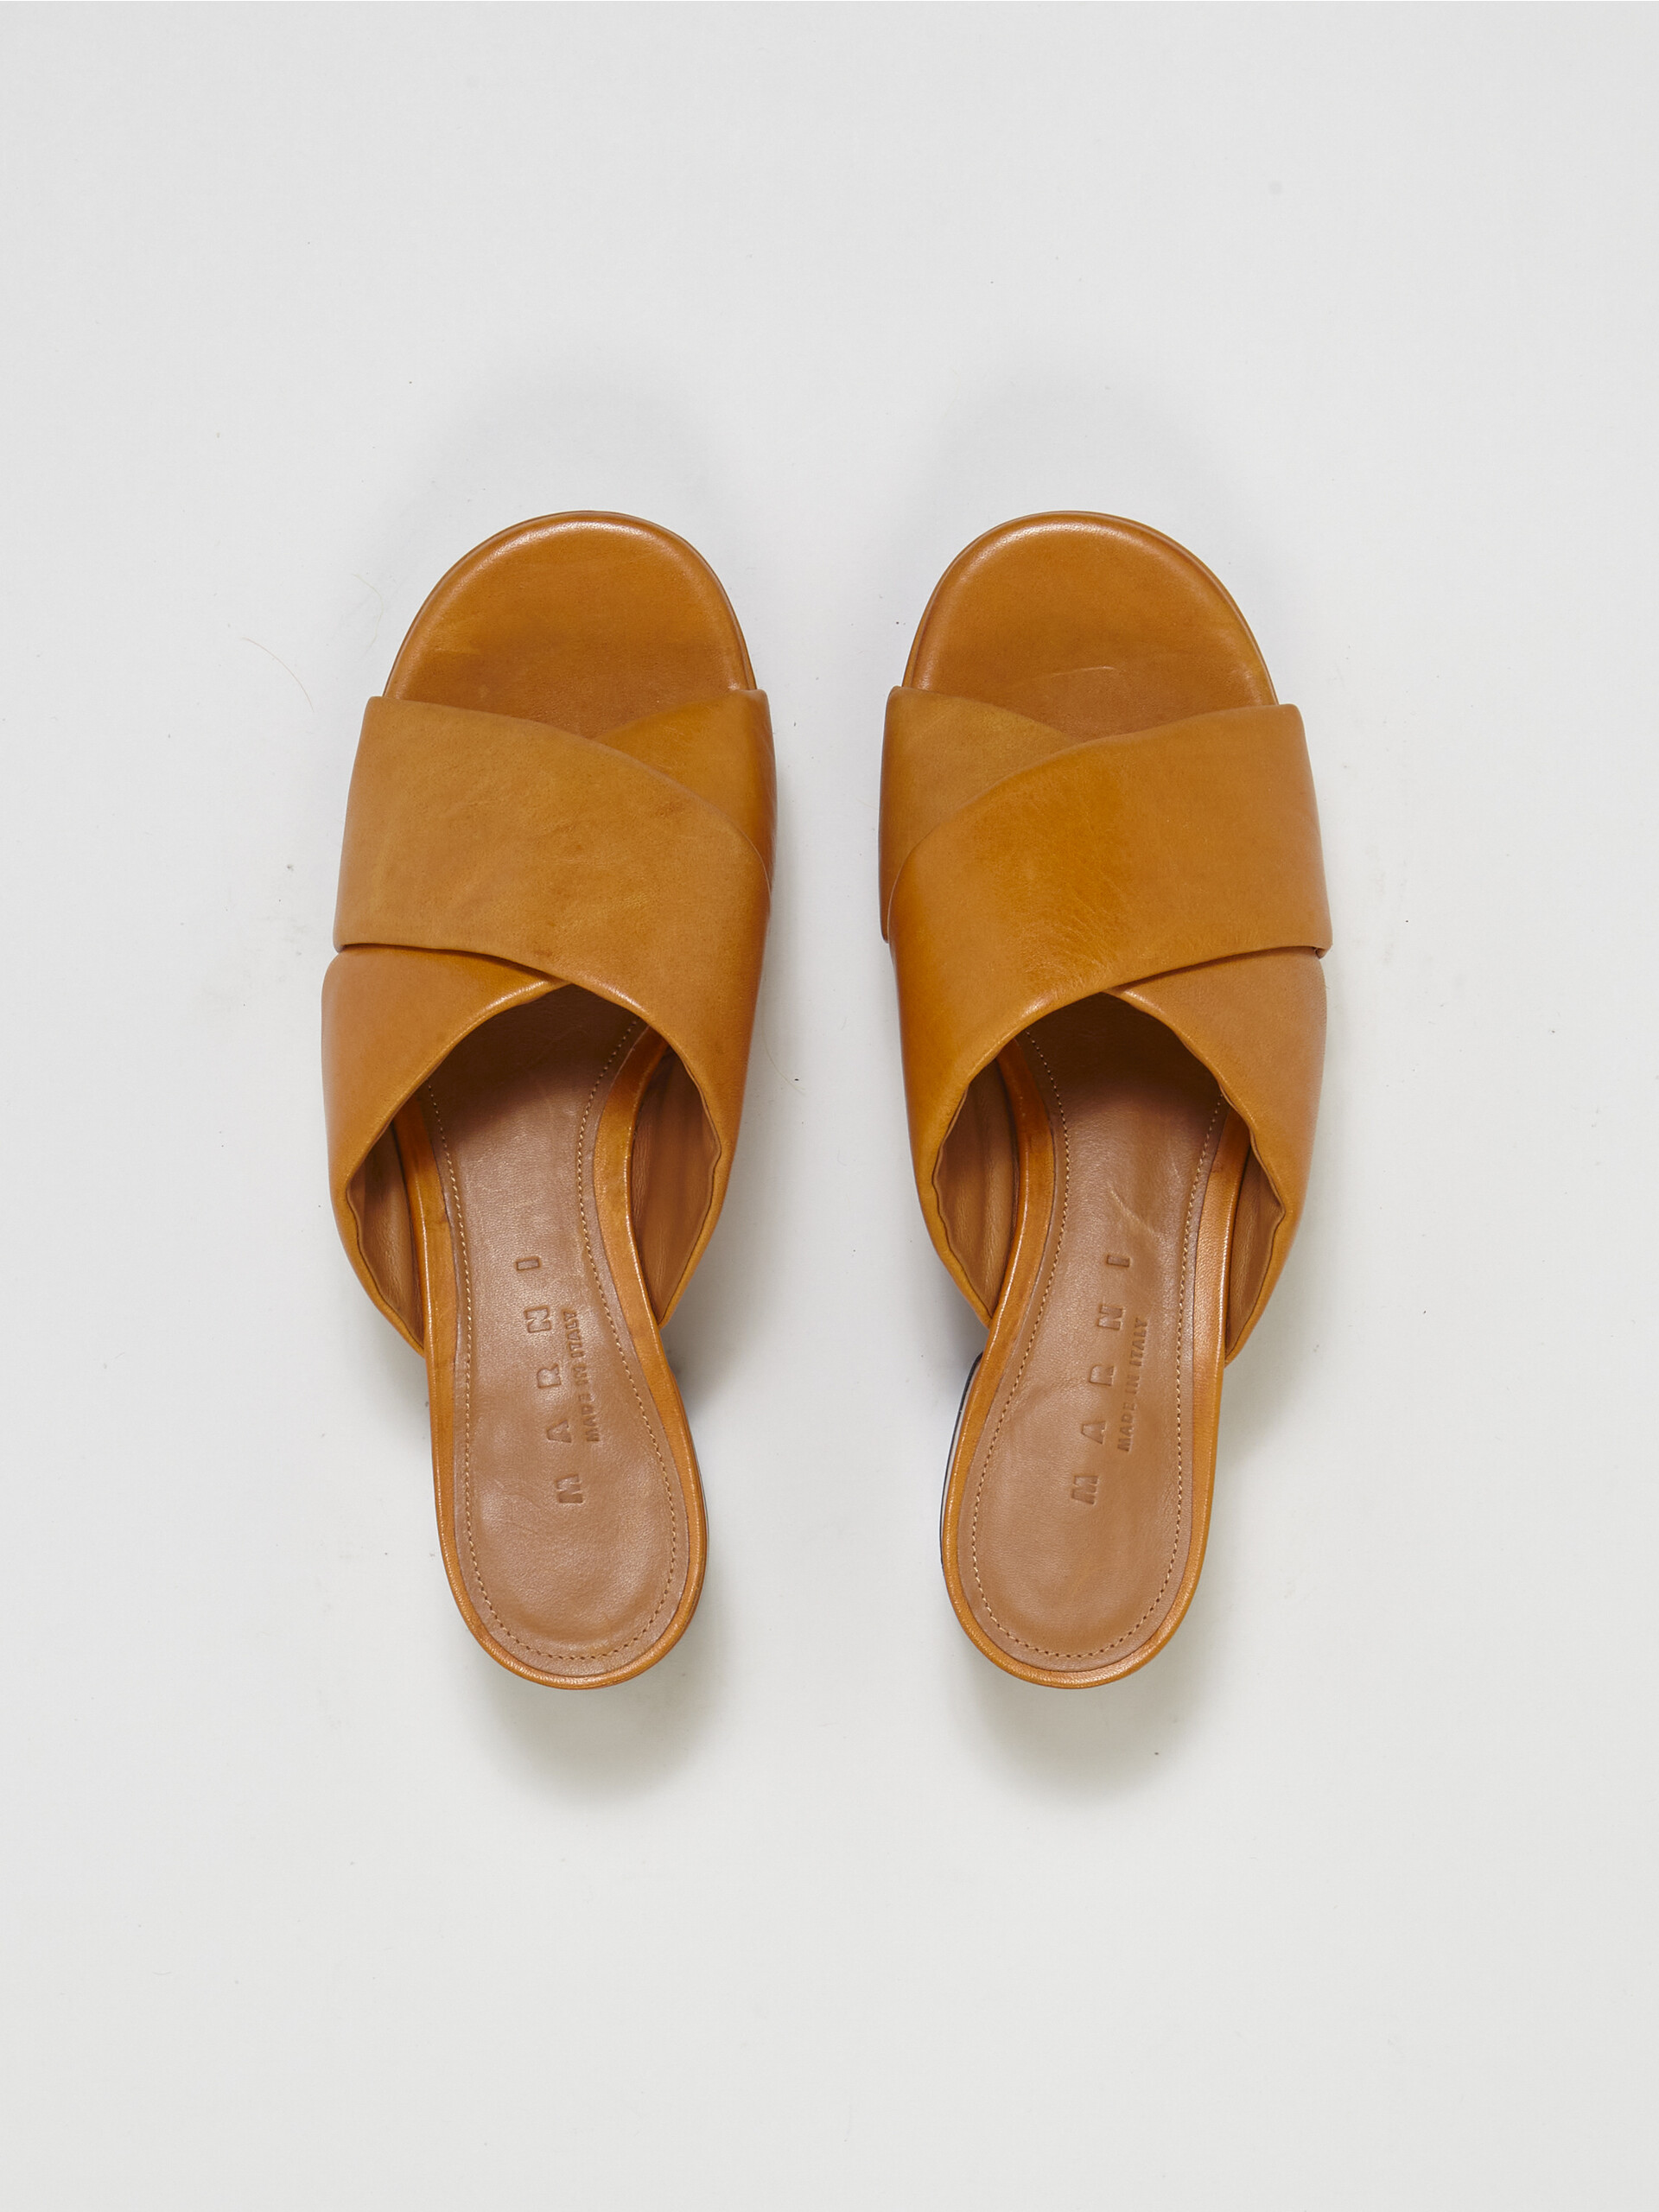 Yellow vegetable-tanned leather sandal - Sandals - Image 4